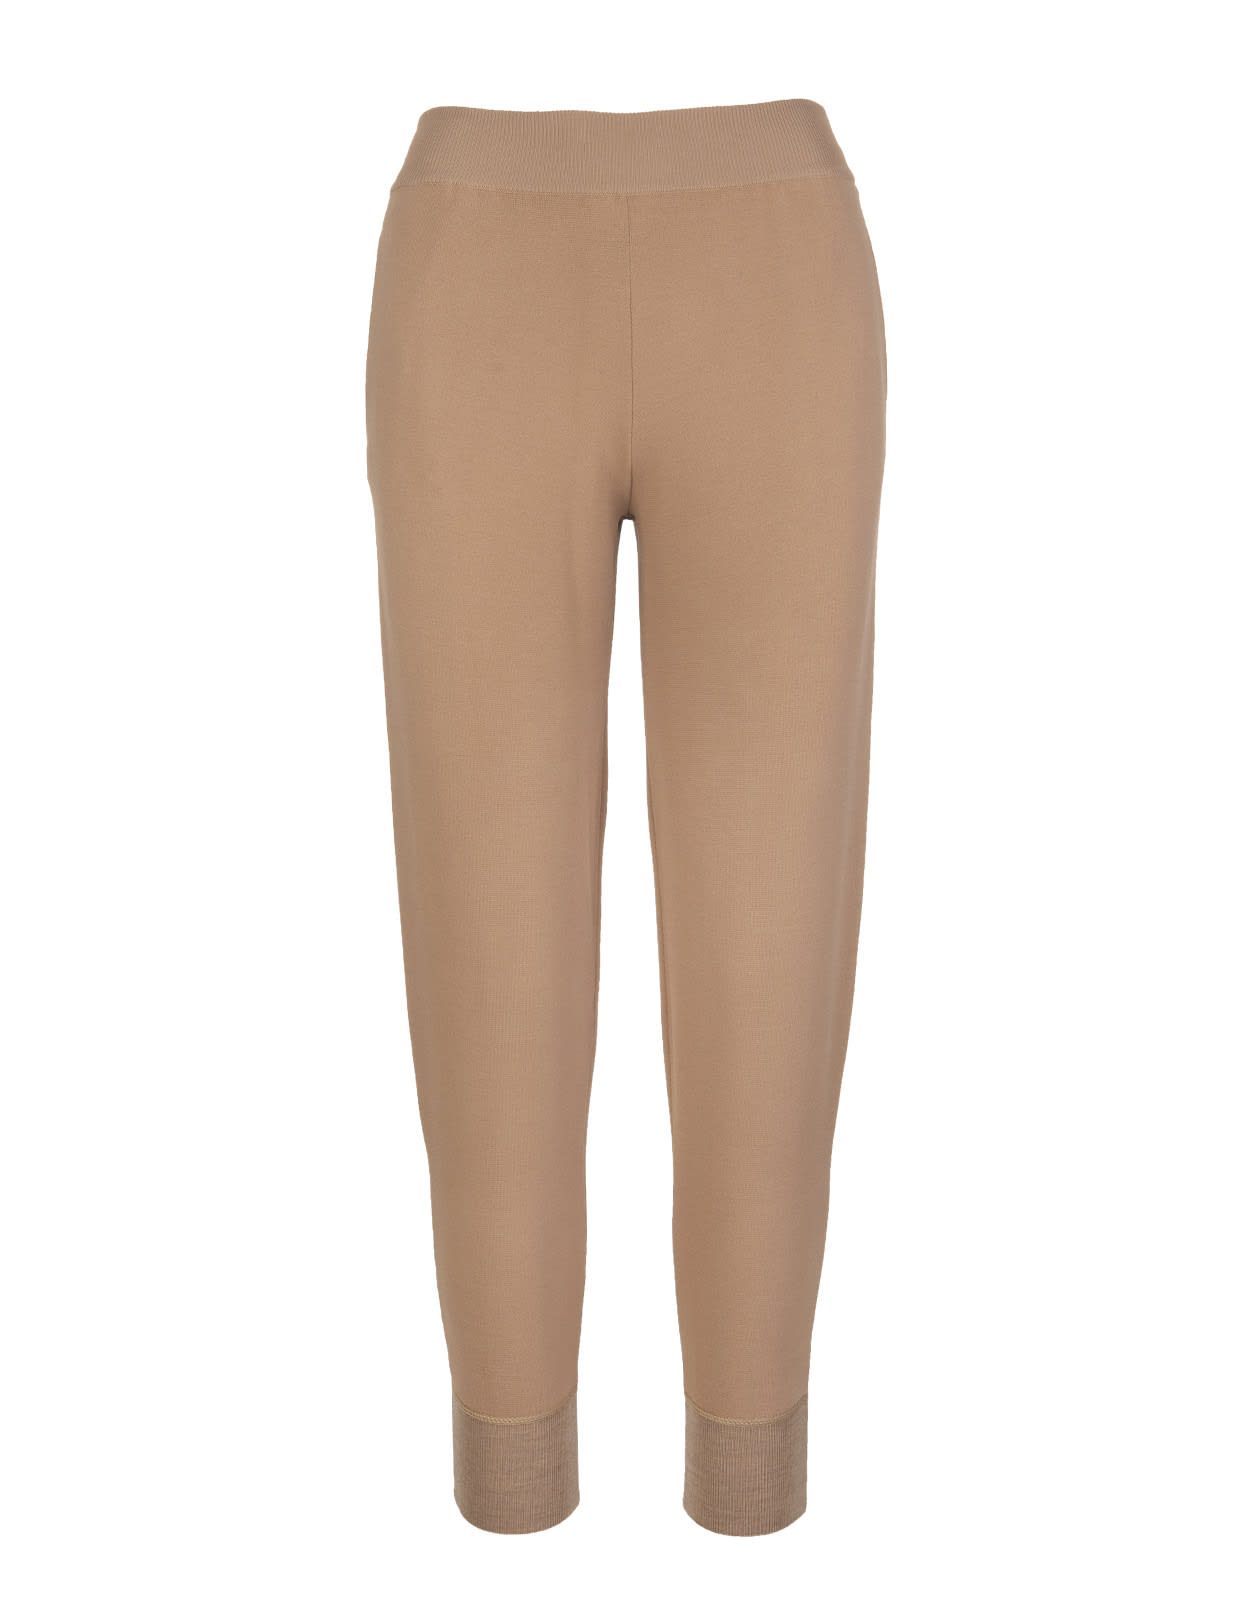 Stella McCartney Woman Camel Compact Knitted Trousers